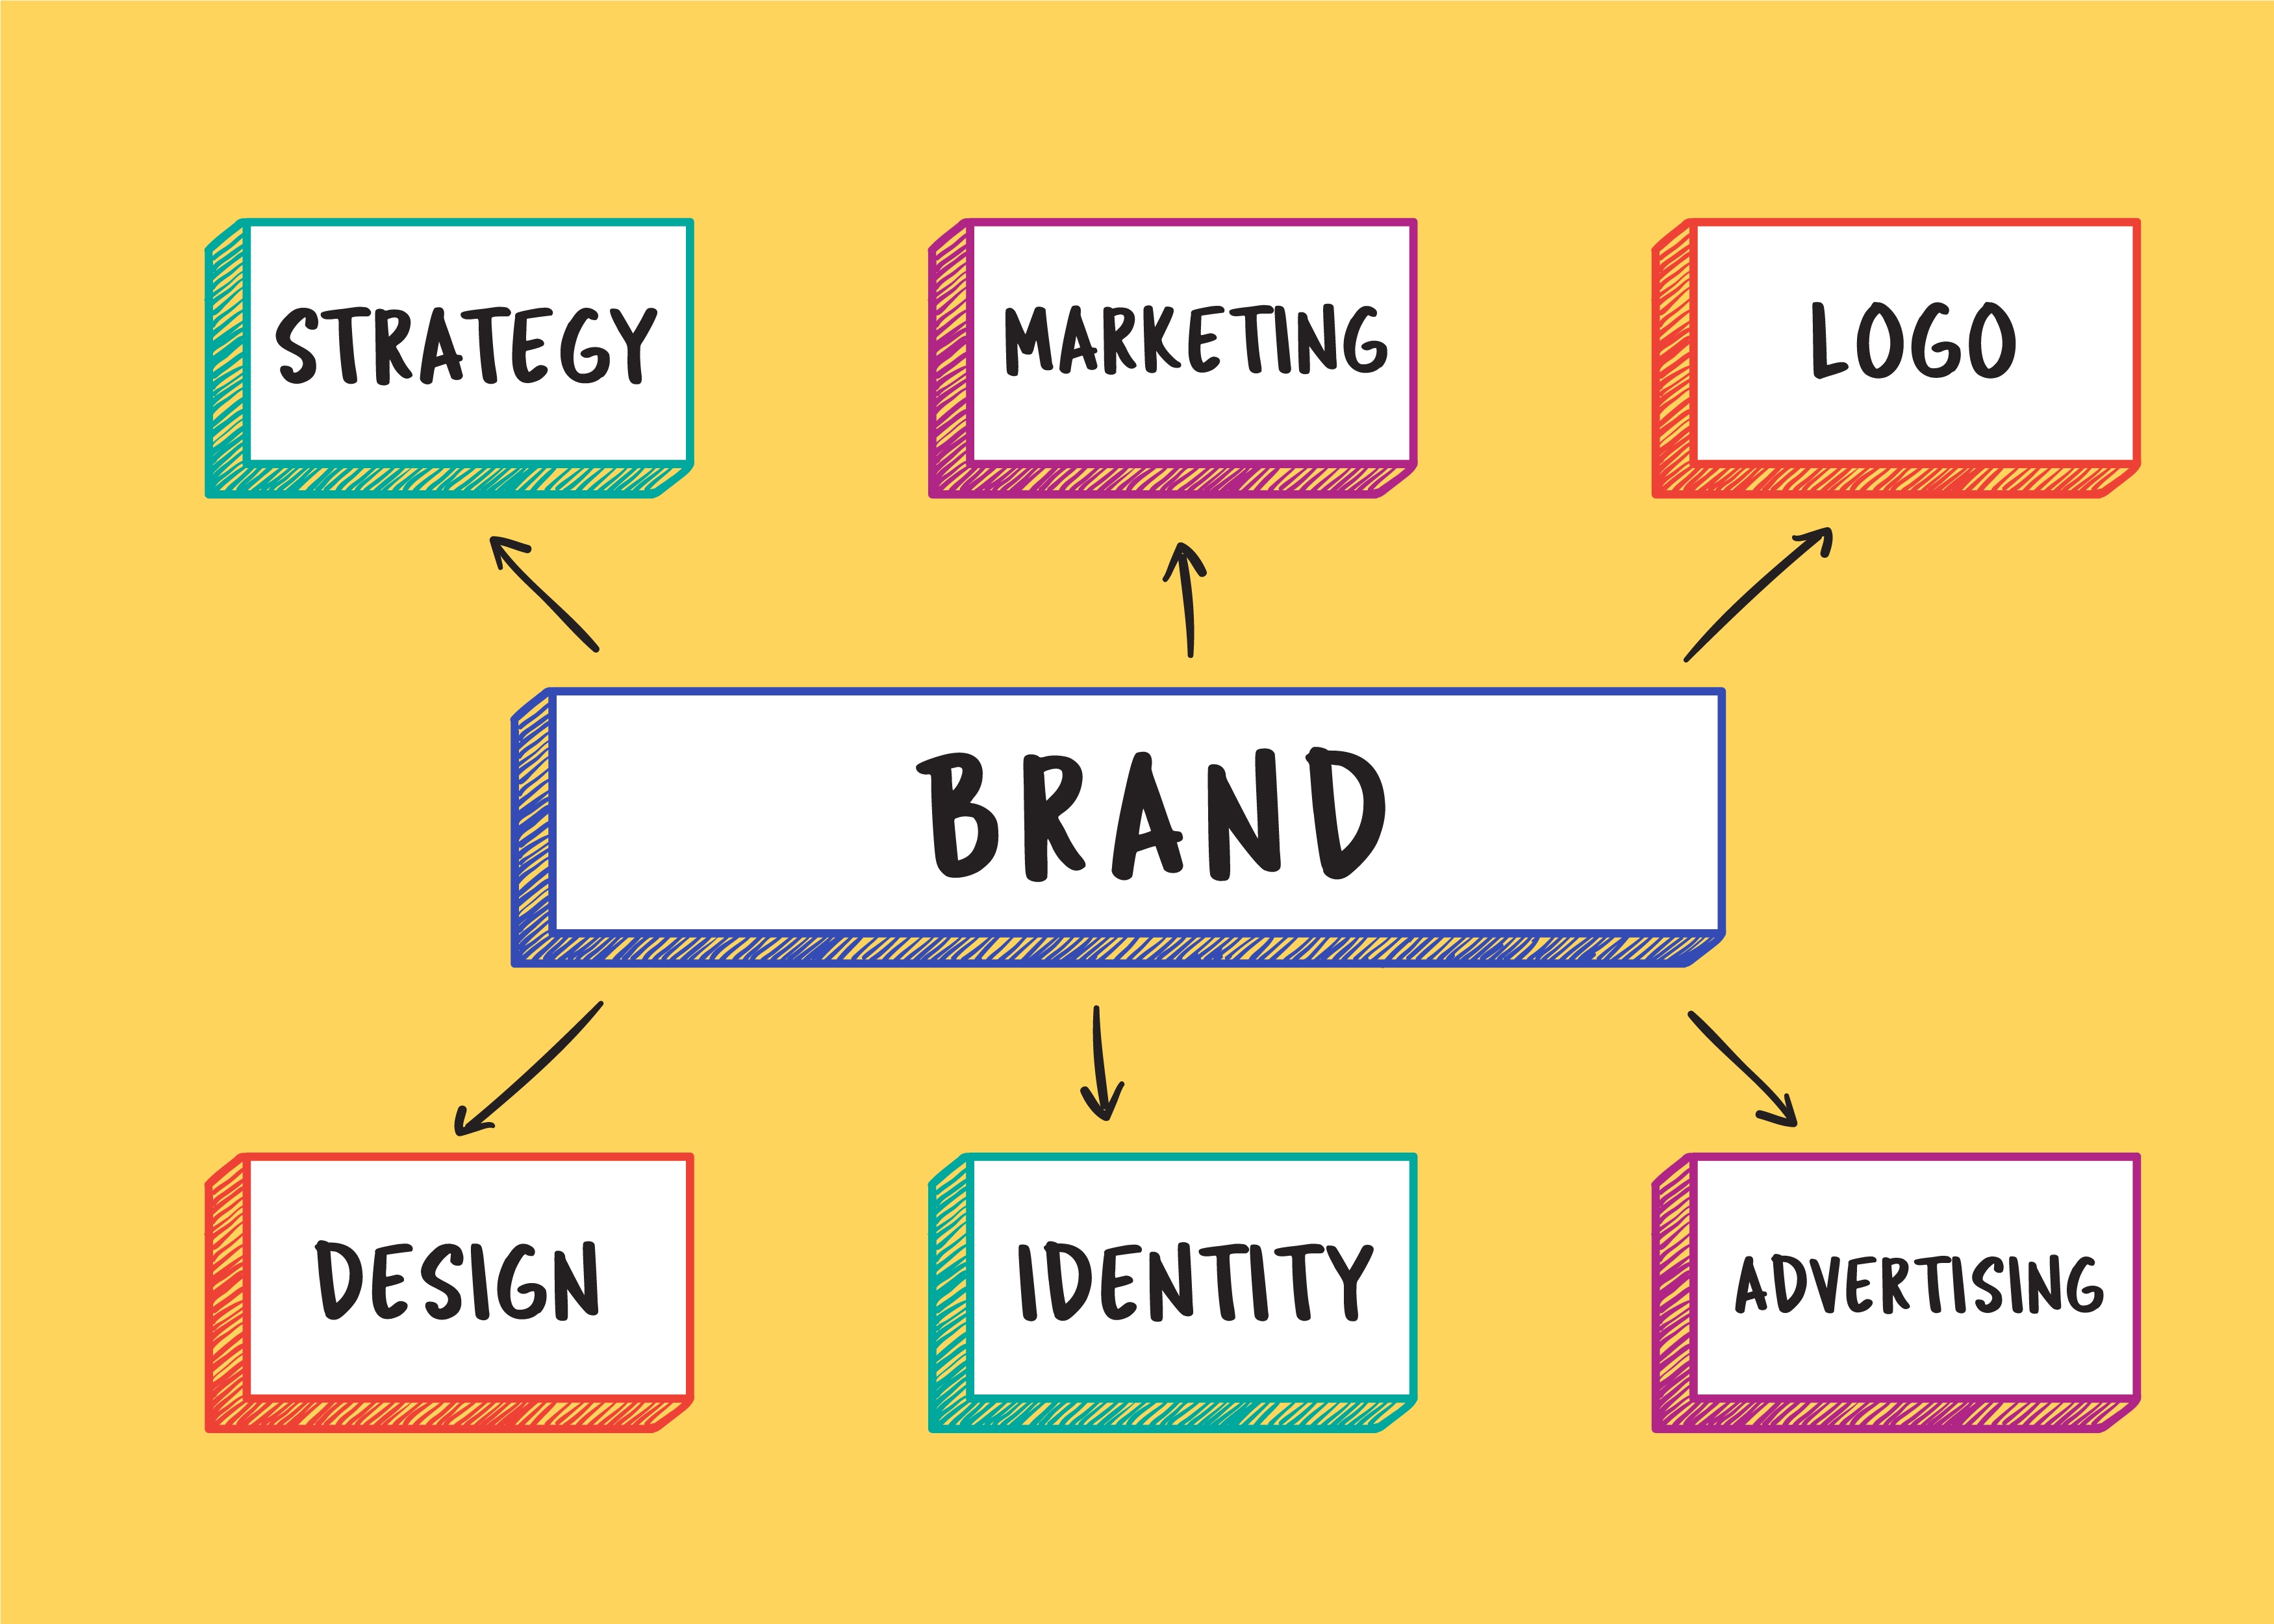 Personal branding is what shapes the perception of an individual